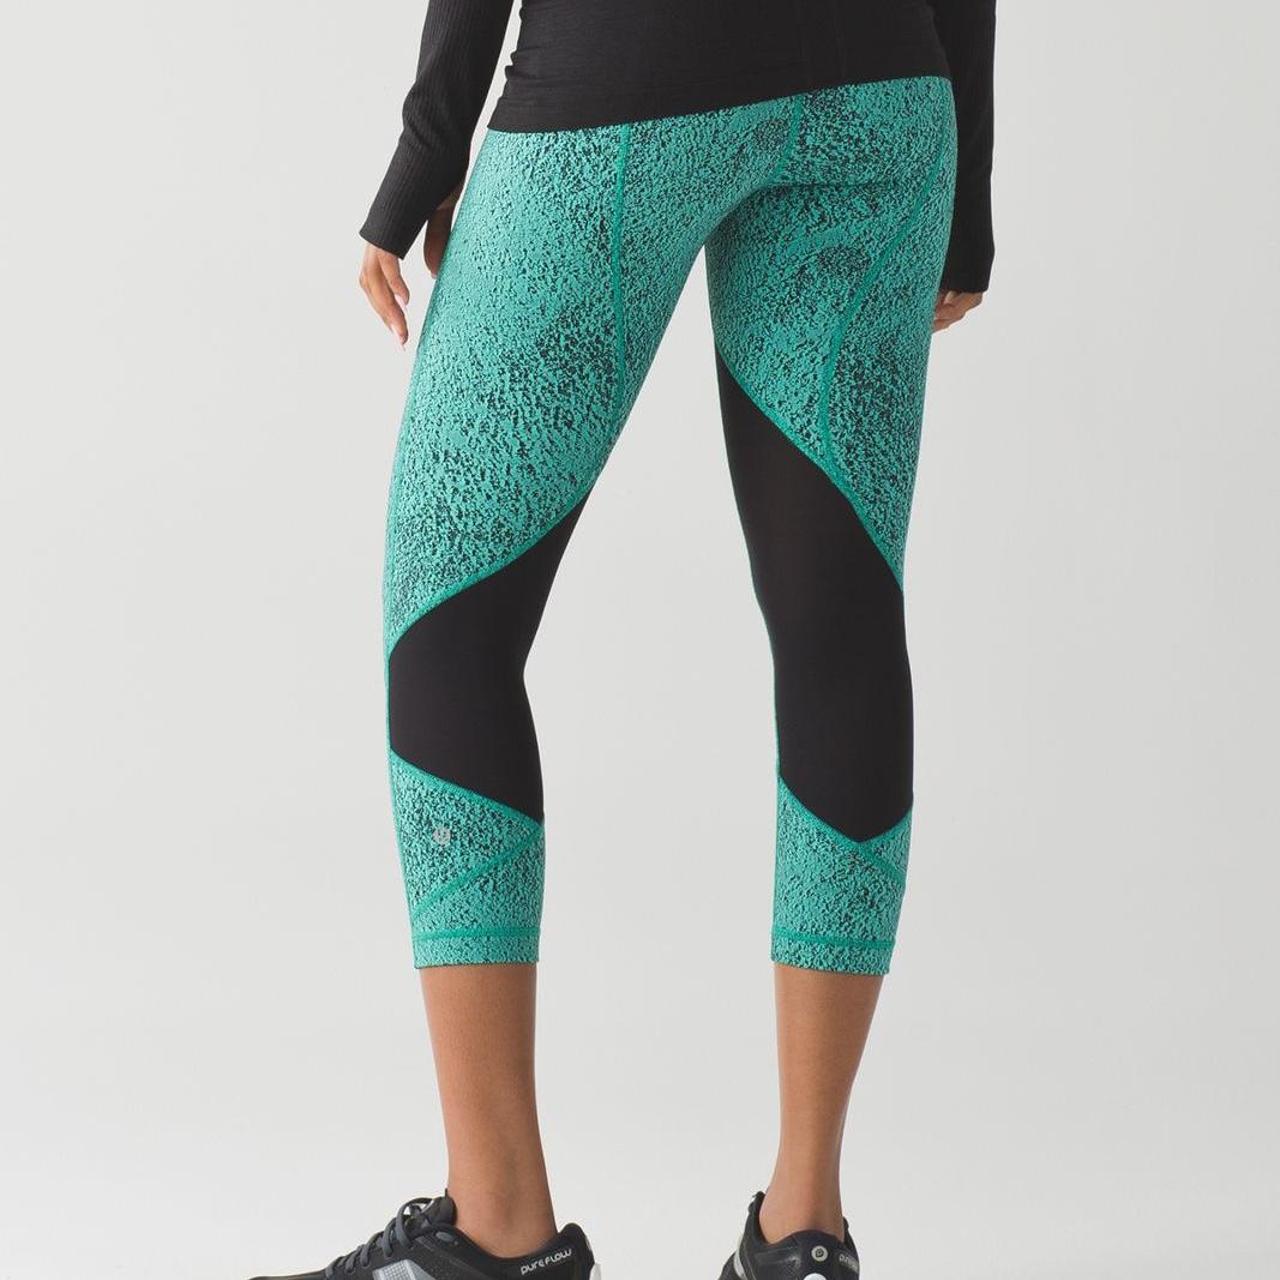 Lululemon Black Pace Rival Crop Leggings - Luxtreme Fabric with